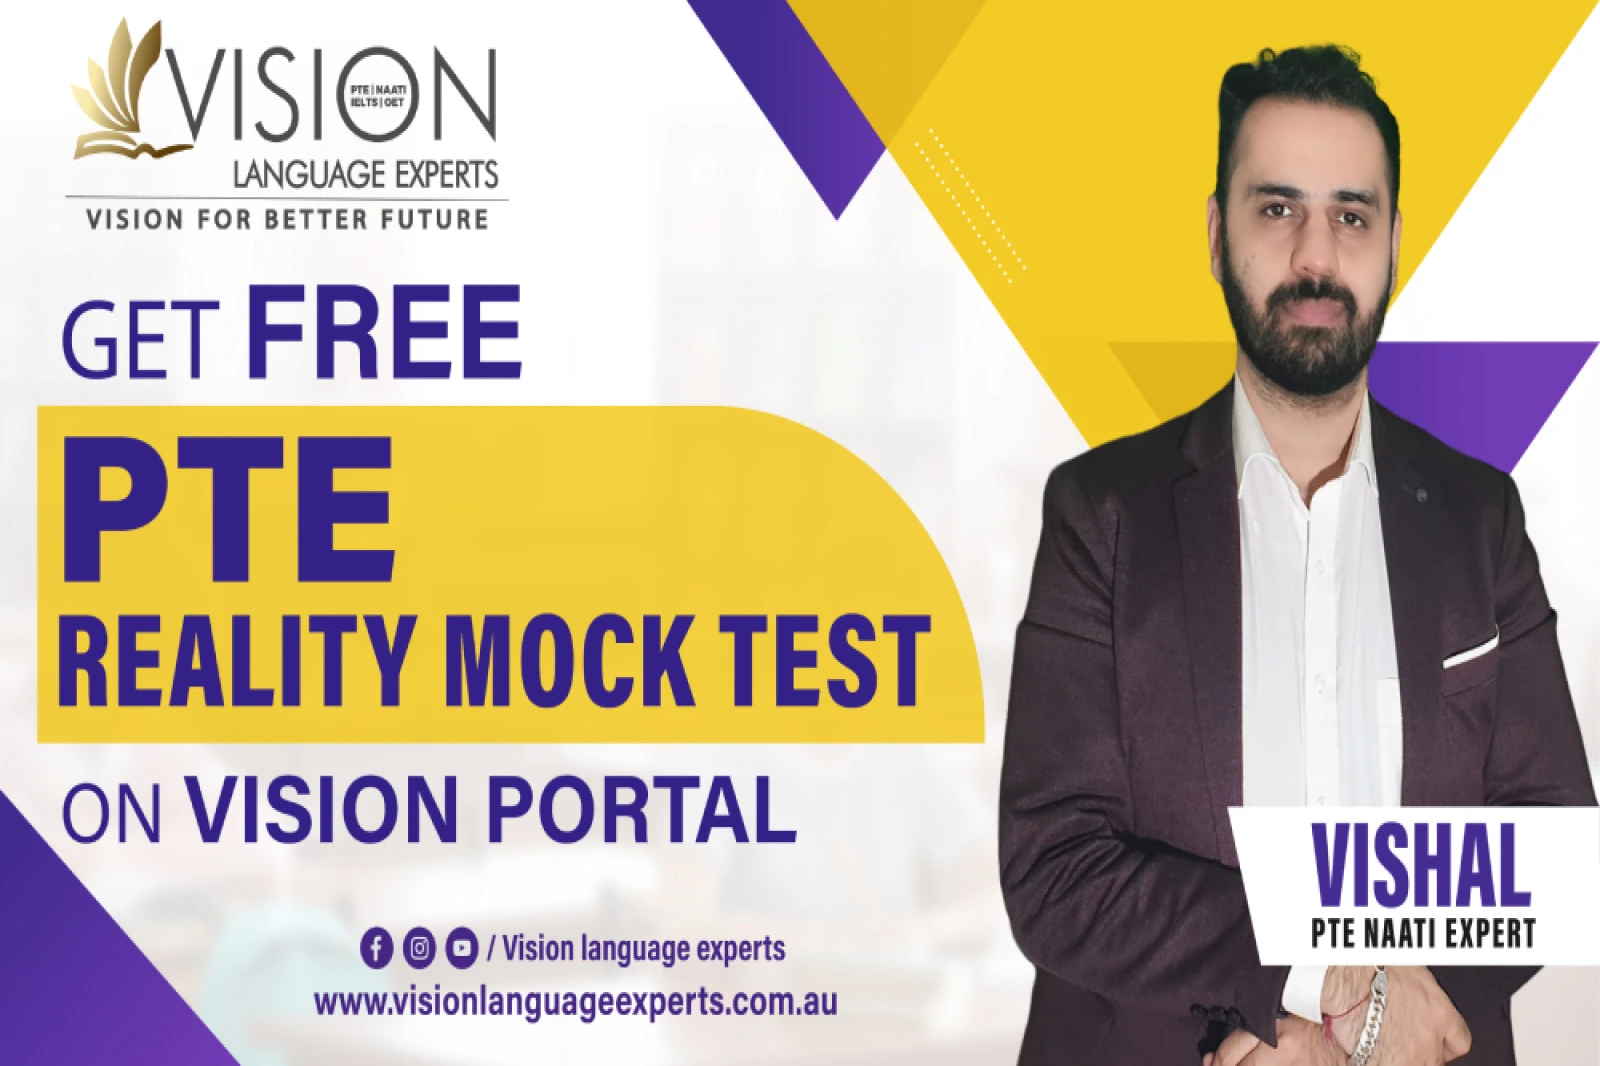 Master Your PTE Skills with Our Free PTE Mock Test at Vision Language Experts